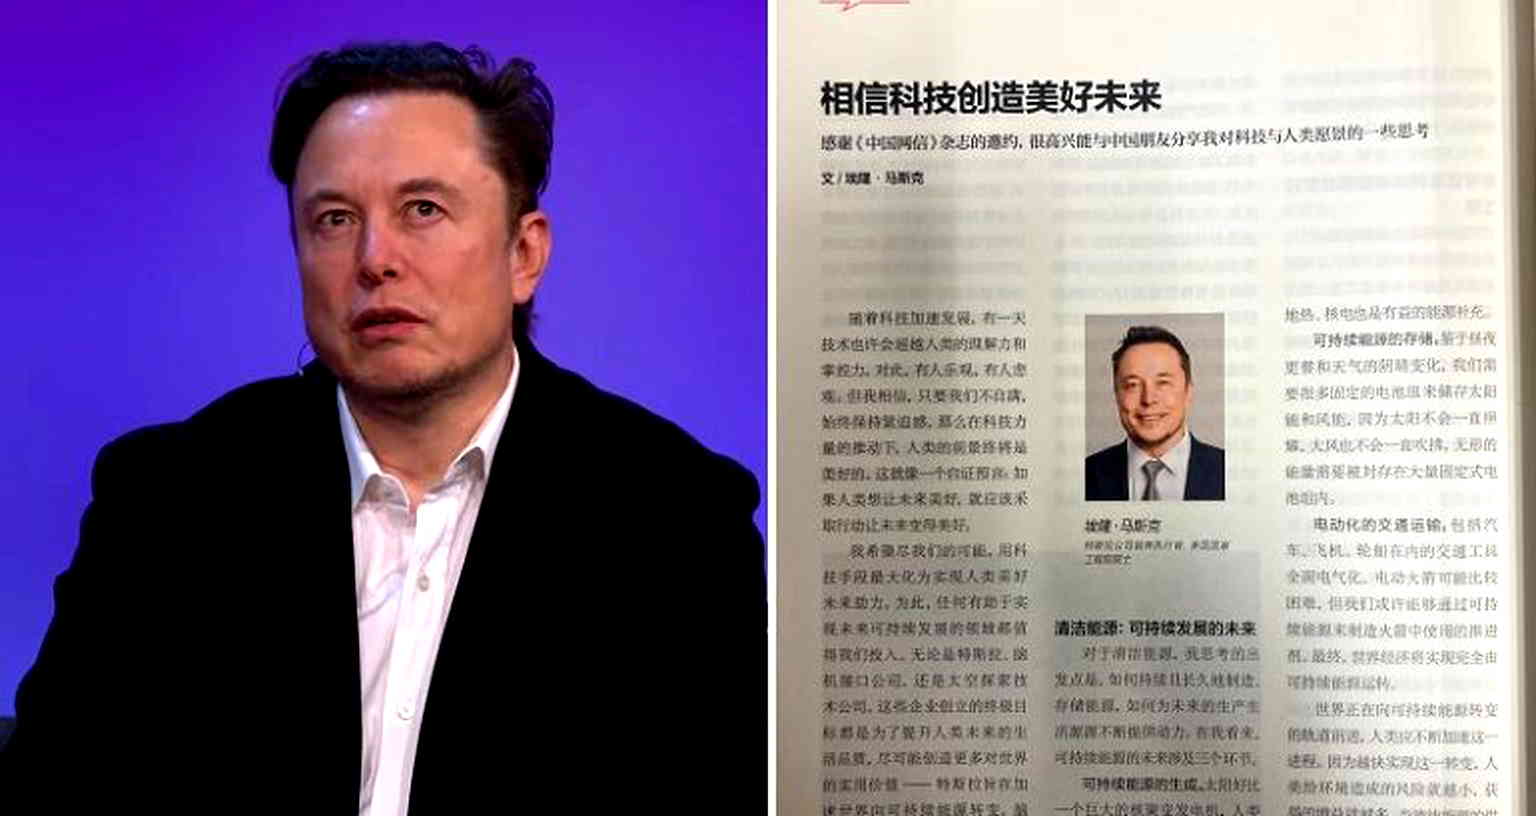 ‘Free speech absolutist’ Elon Musk pursues ‘like-minded Chinese partners’ in column for China’s online censor